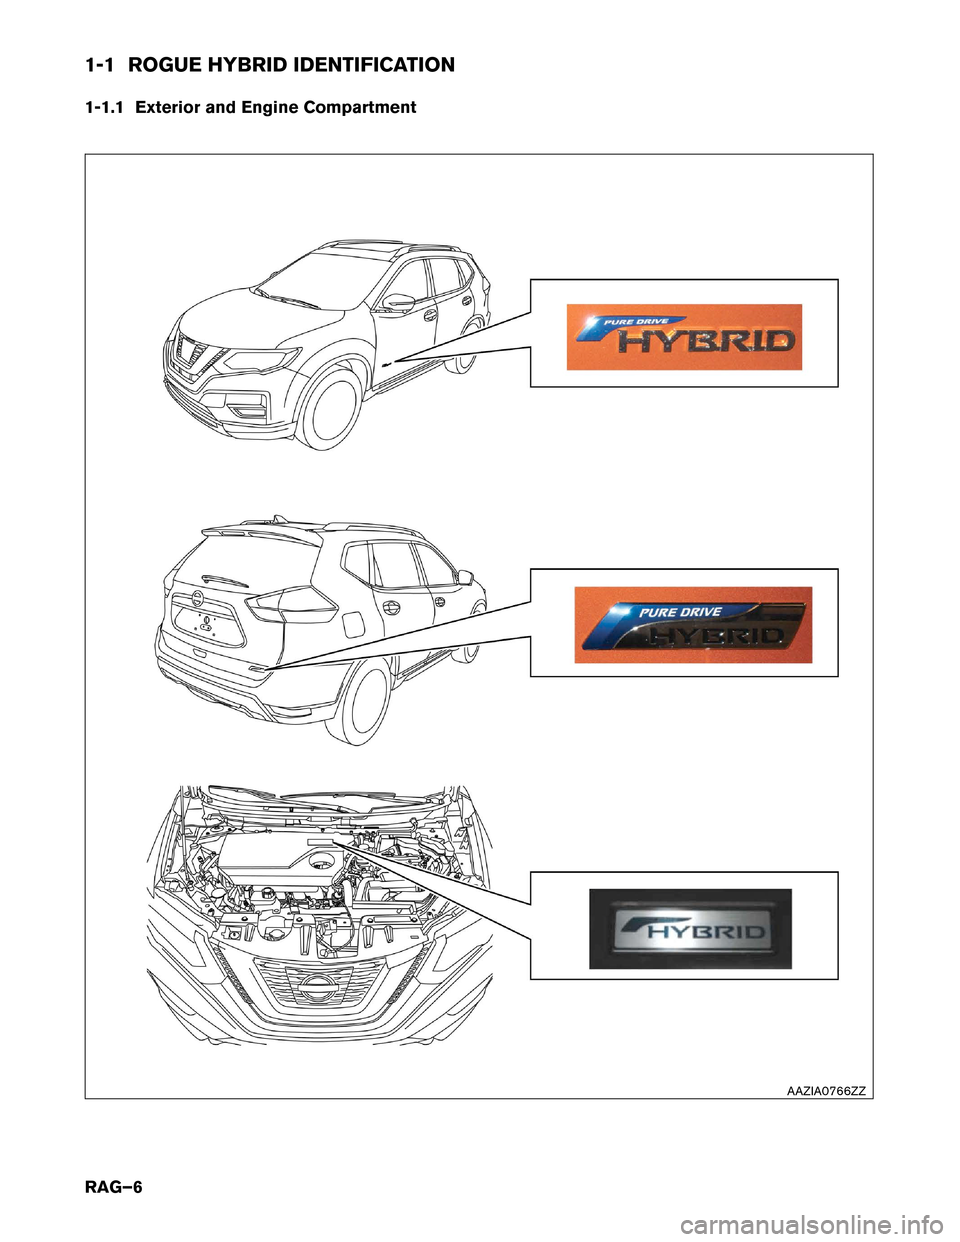 NISSAN ROGUE HYBRID 2017 2.G Roadside Assistance Guide 1-1 ROGUE HYBRID IDENTIFICATION
1-1.1
Exterior and Engine Compartment AAZIA0766ZZ
RAG–6  